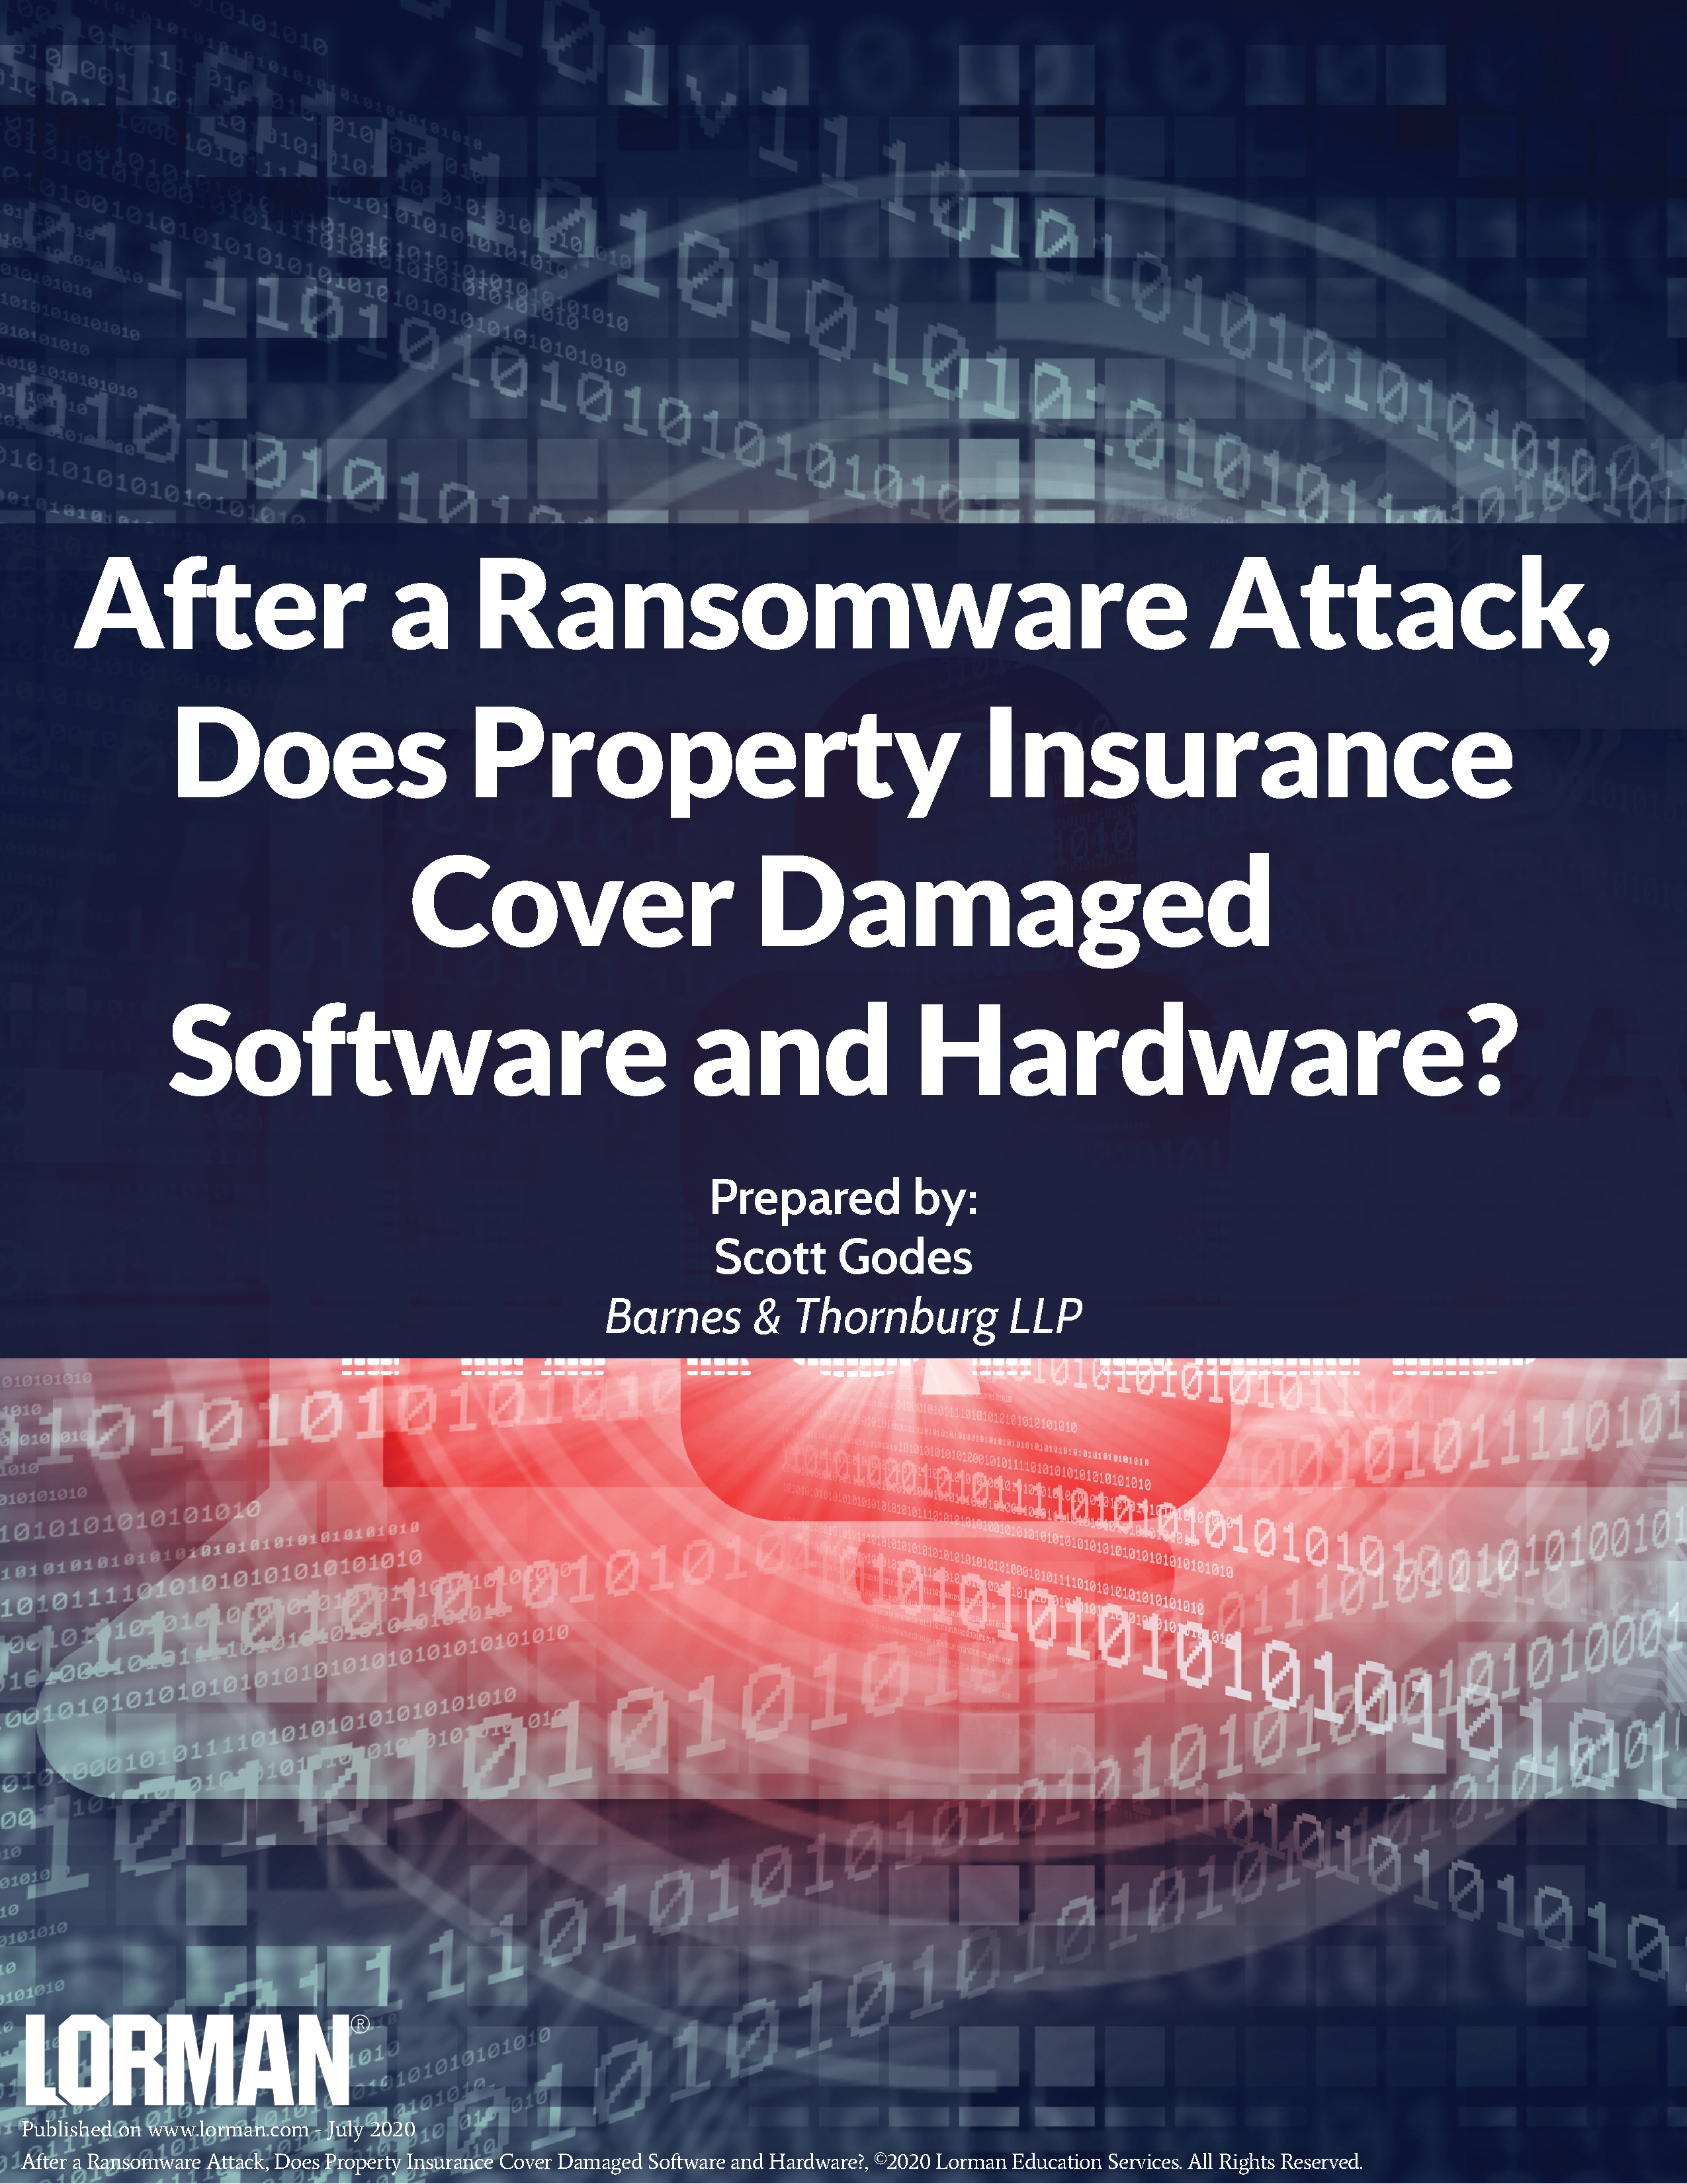 After a Ransomware Attack, Does Property Insurance Cover Damaged Software and Hardware?